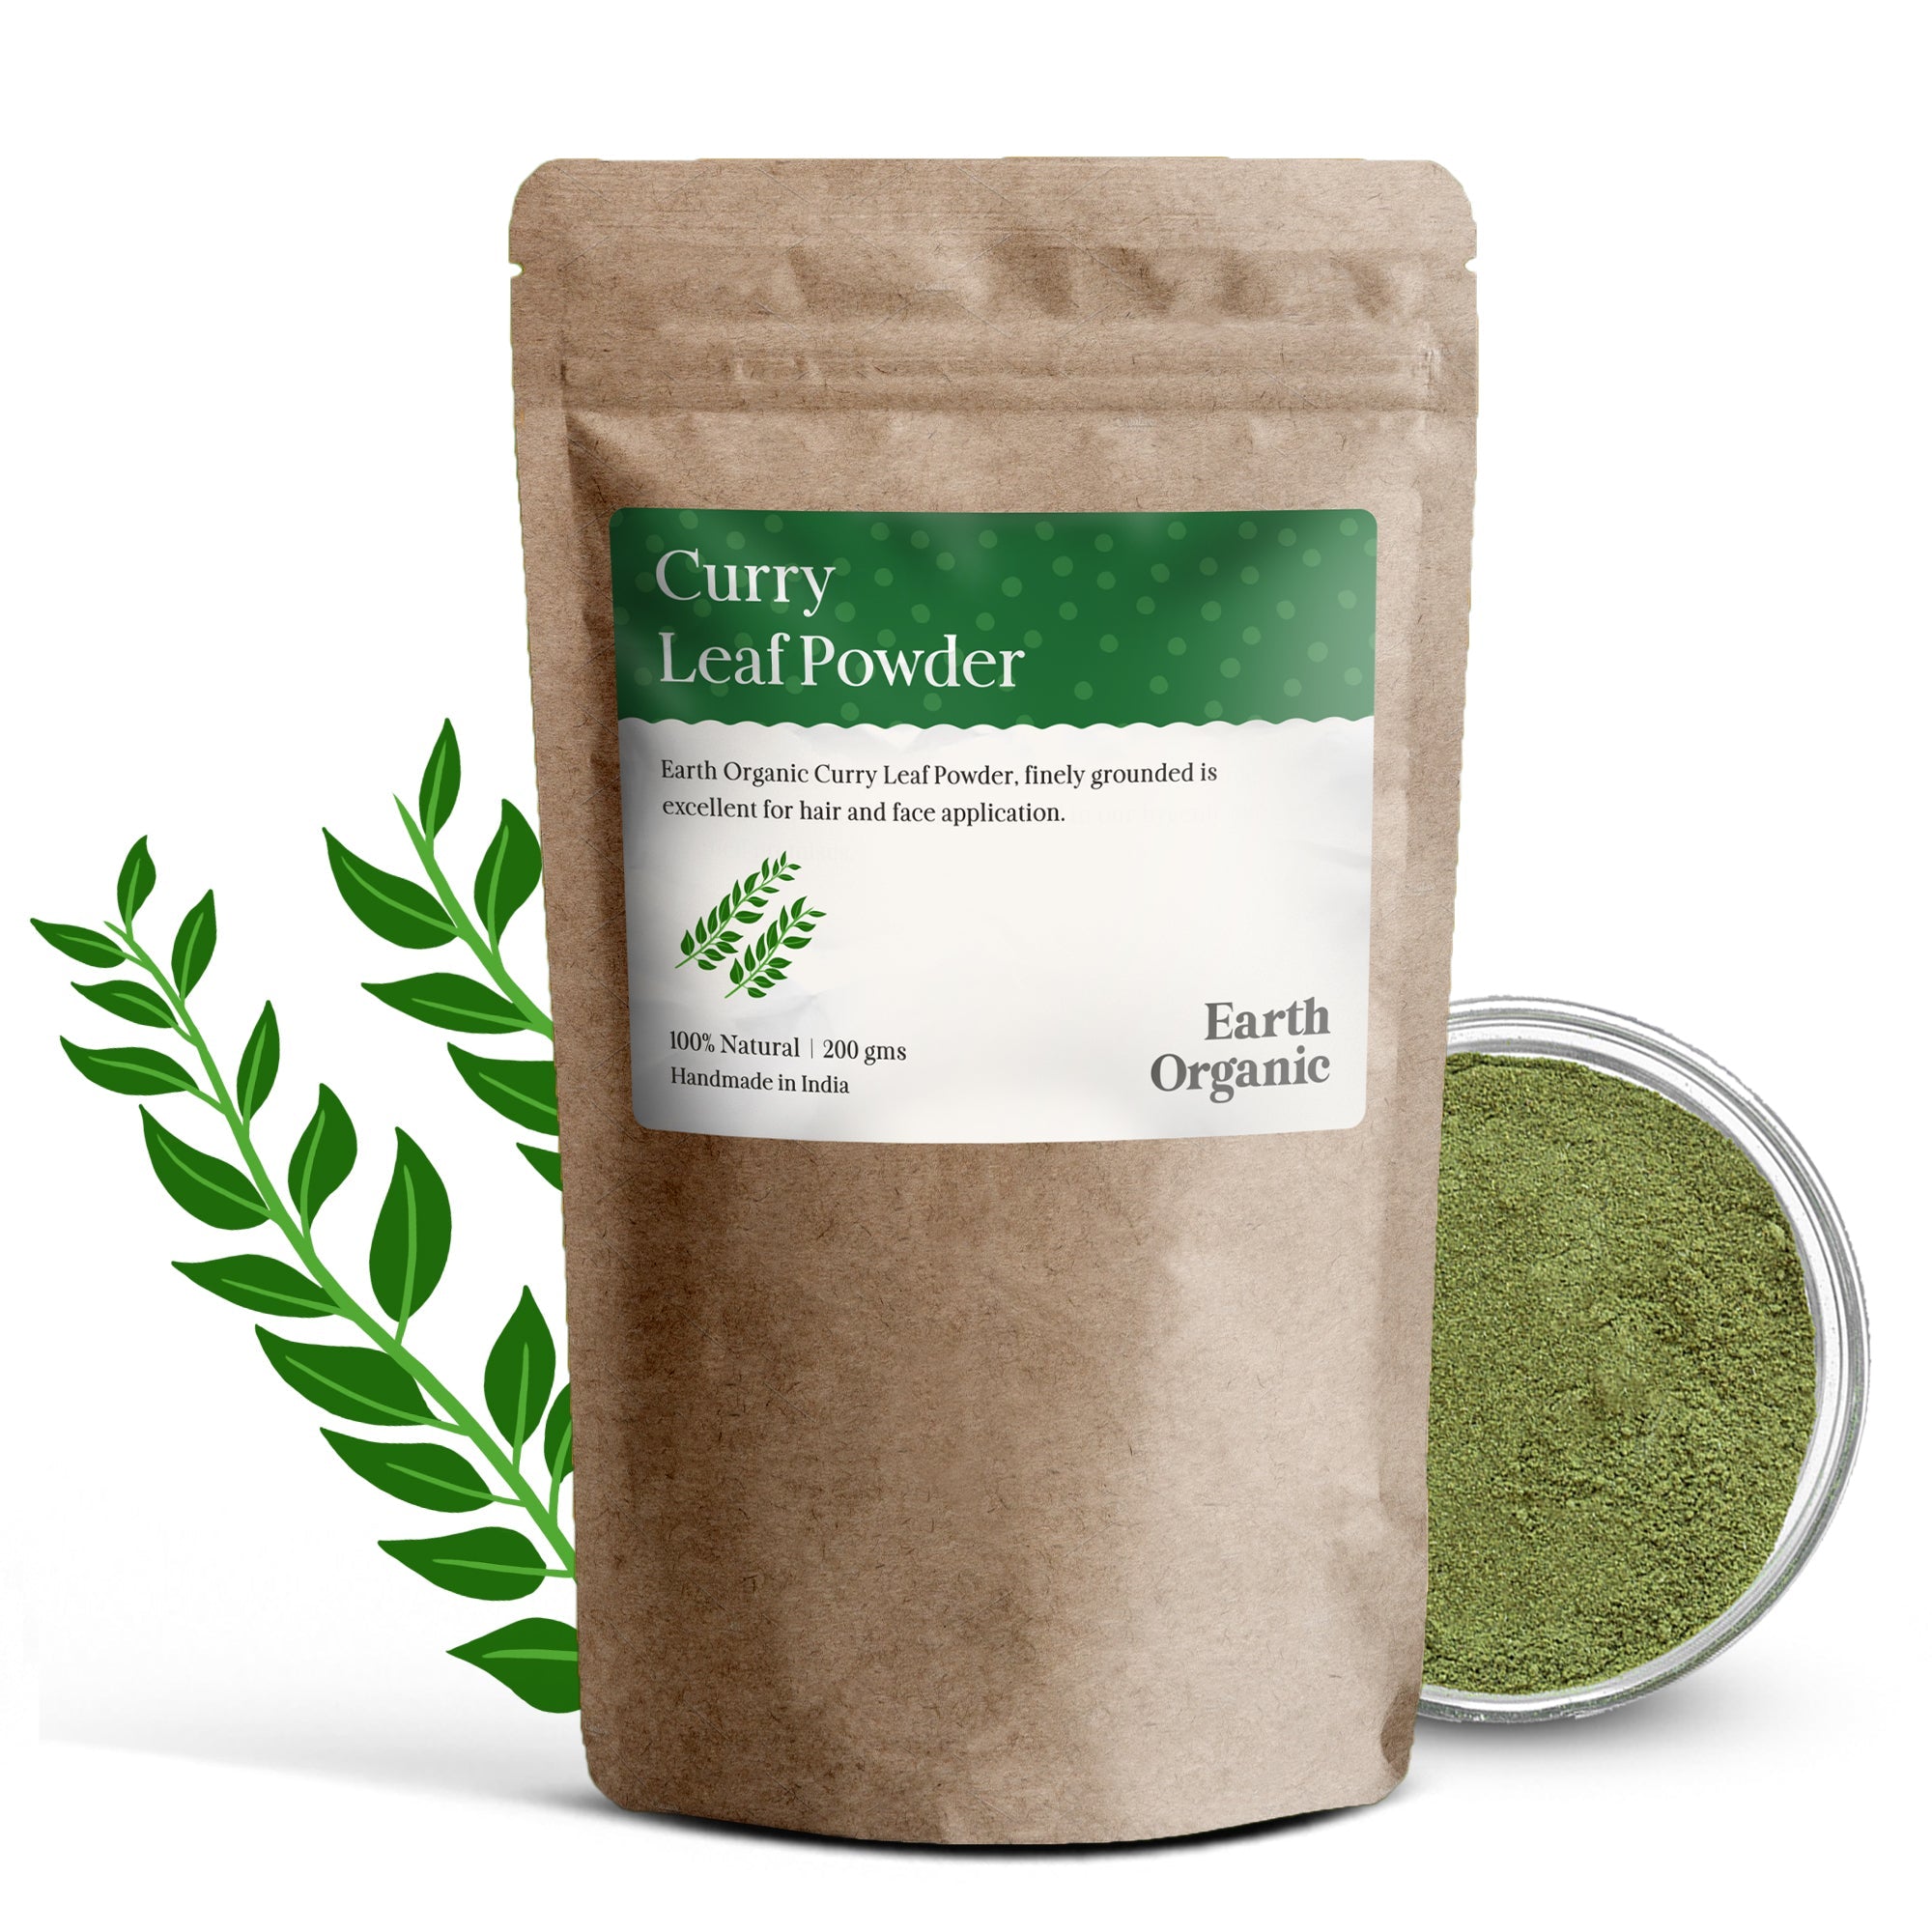 100% Natural & Organic Curry Leaf Powder Face Pack & Hair Pack - The Earth Organic